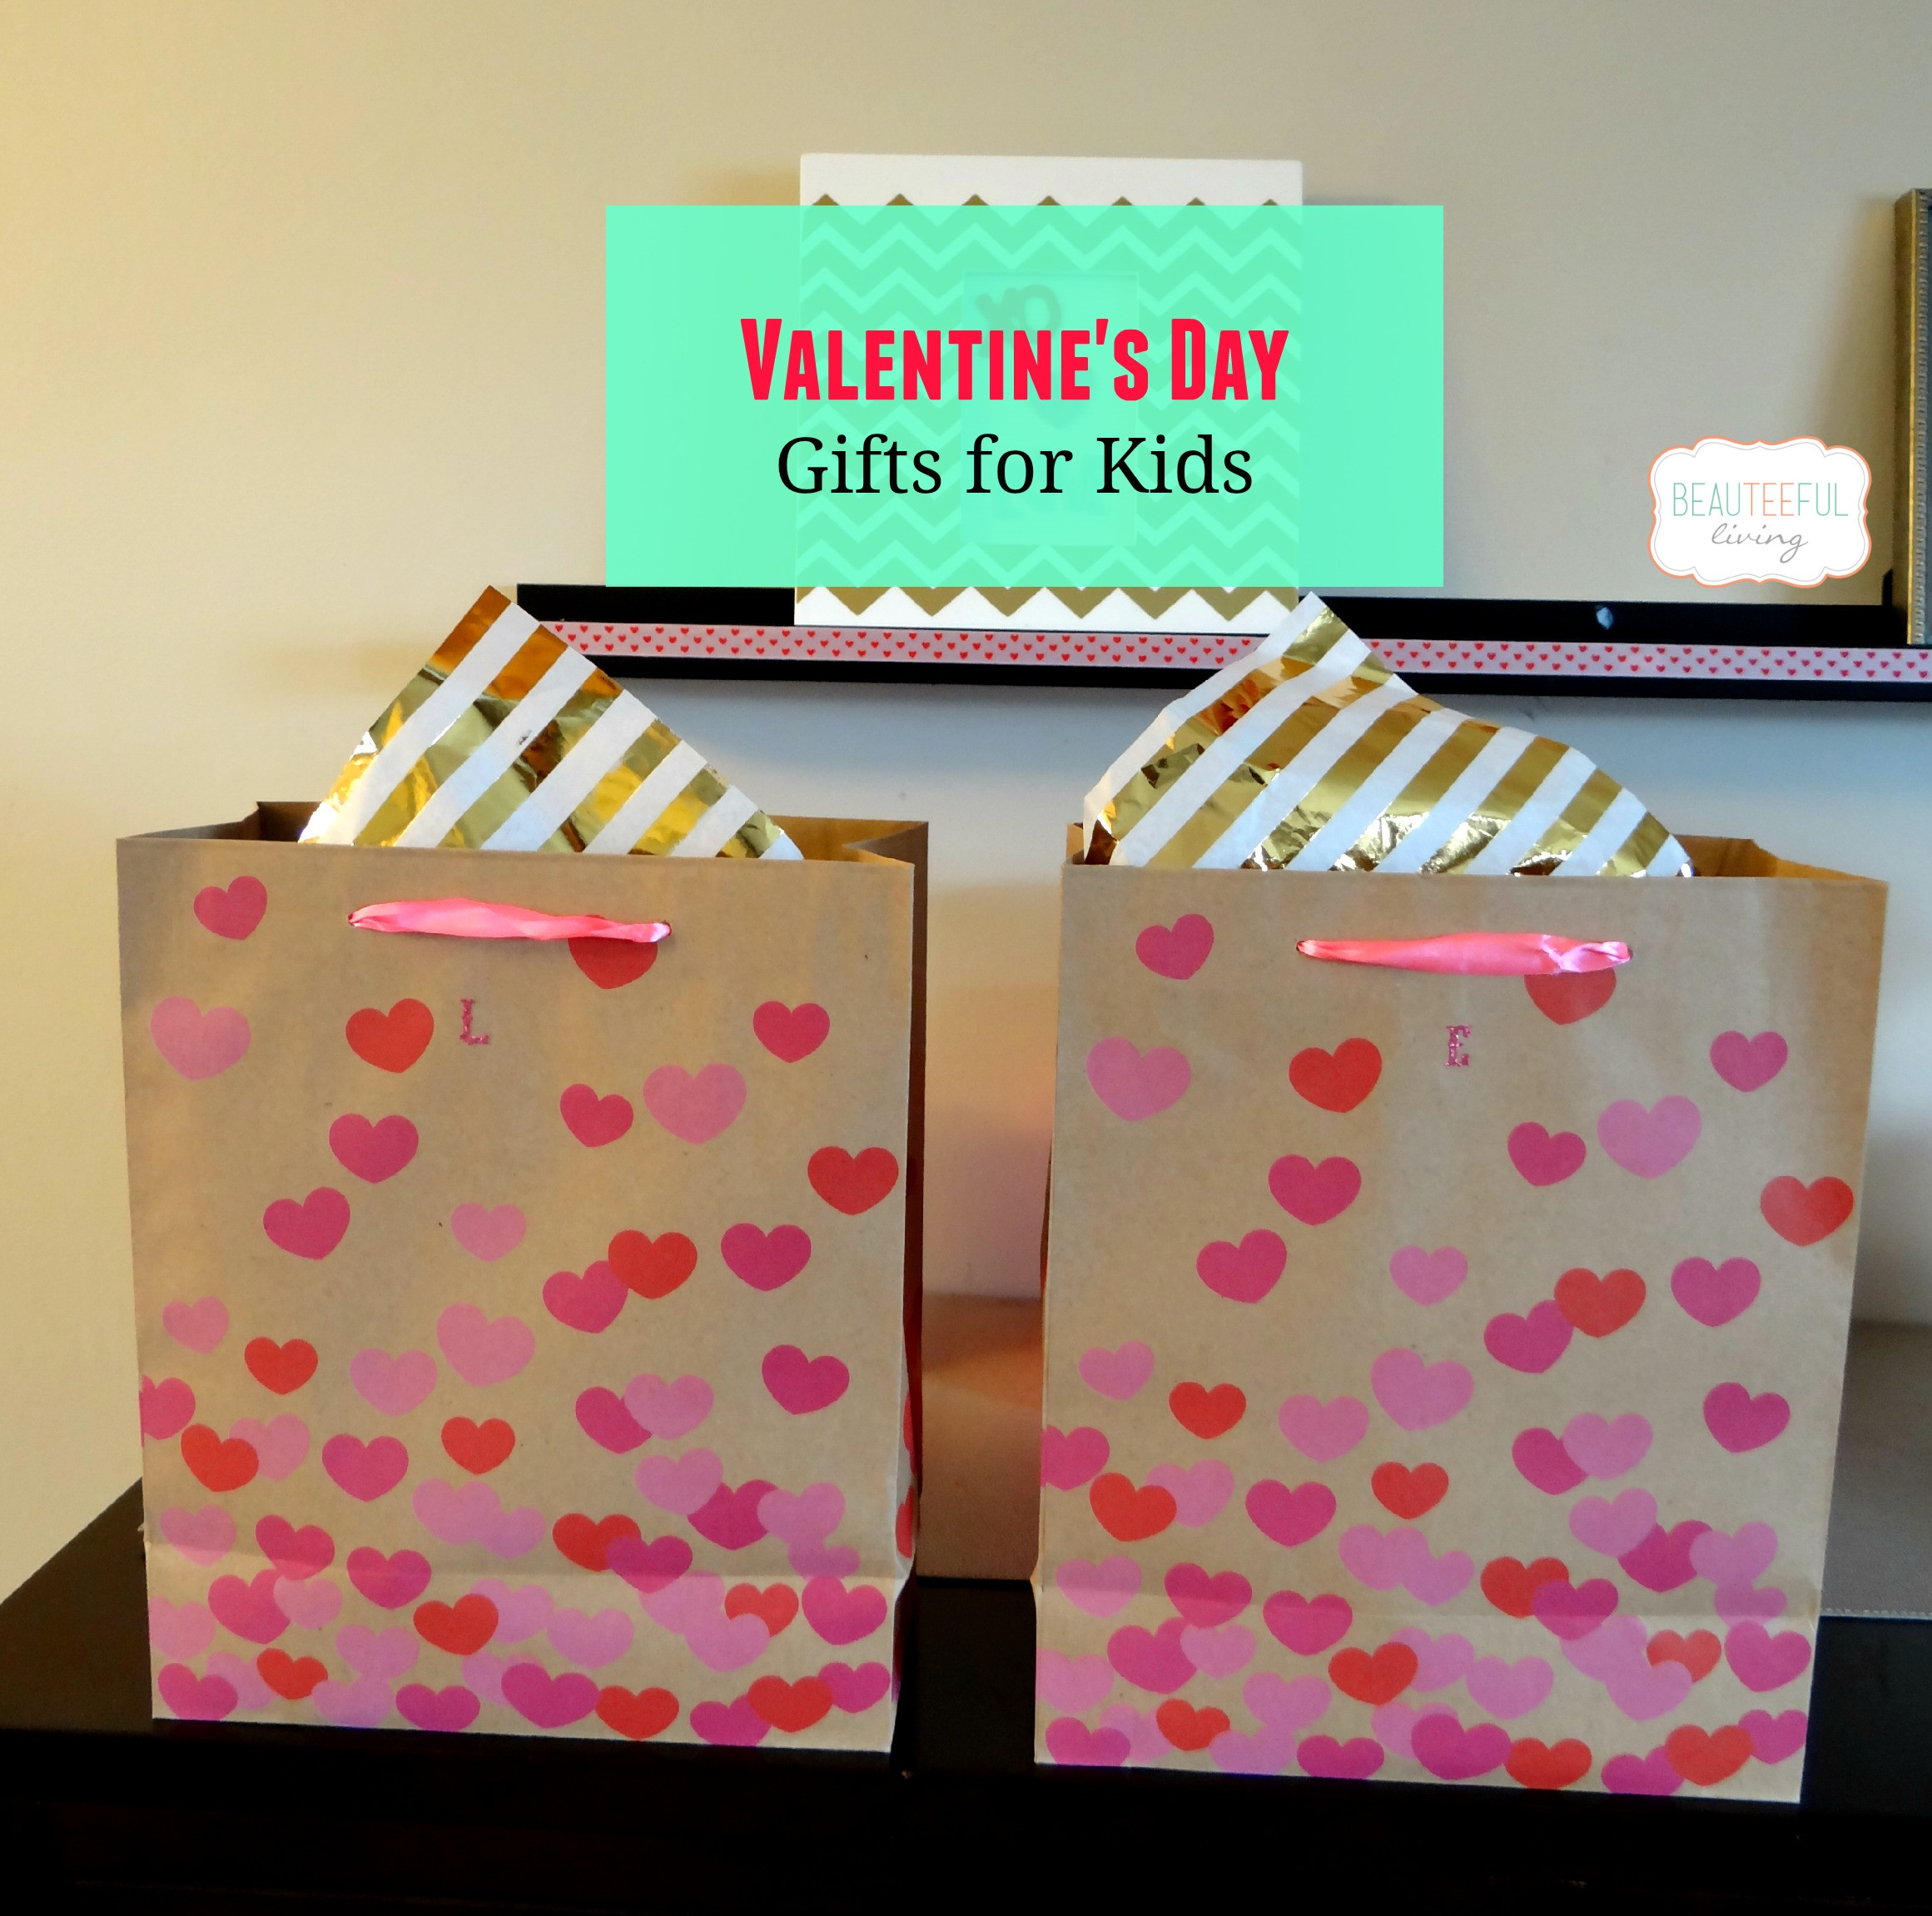 What Are Good Valentines Day Gifts
 Valentine s Day Gifts for Kids BEAUTEEFUL Living